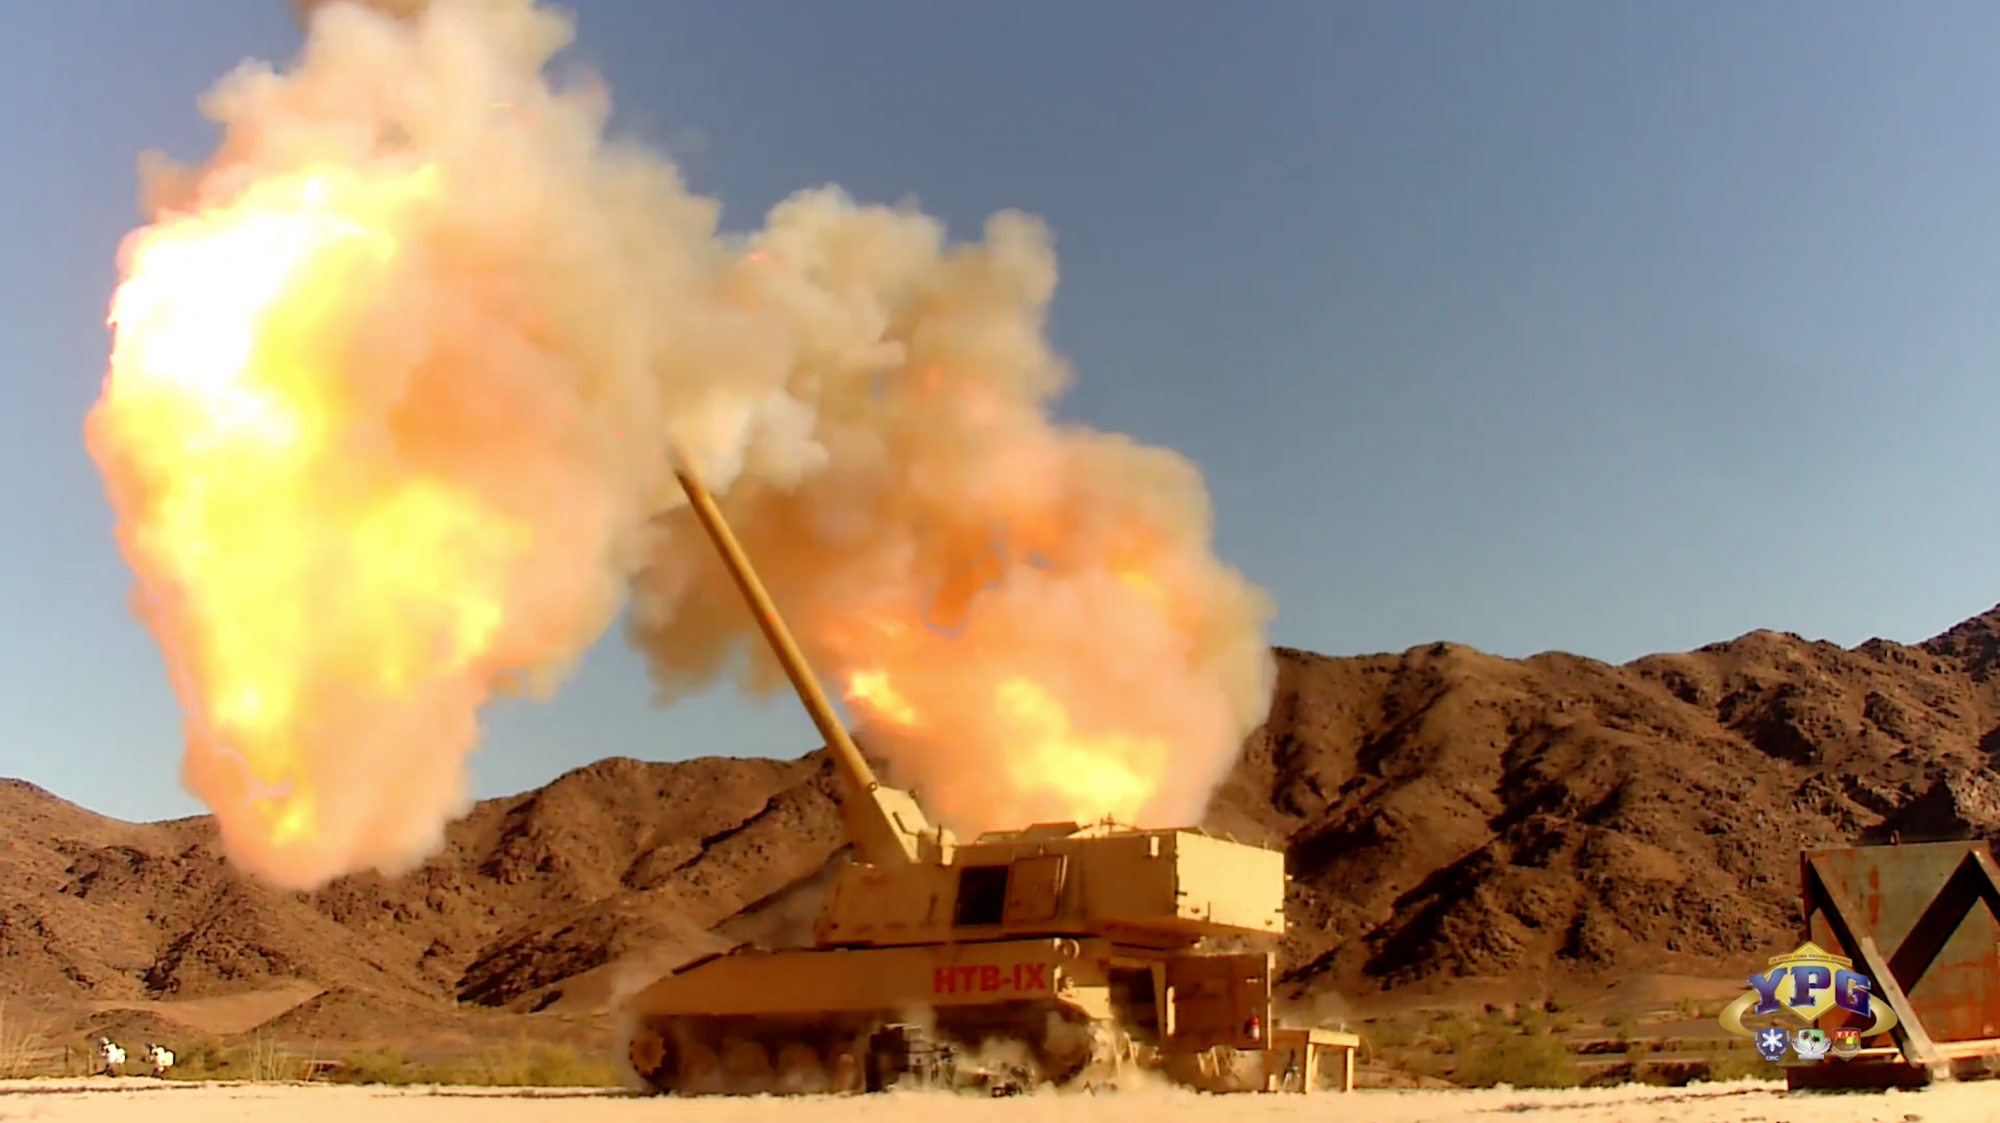 The first successful test of a 70 km (43 miles) shot with a precision-guided munition took place on December 19, 2020 at U.S. Army Yuma Proving Ground. Screengrab from US Army video via DVIDS.